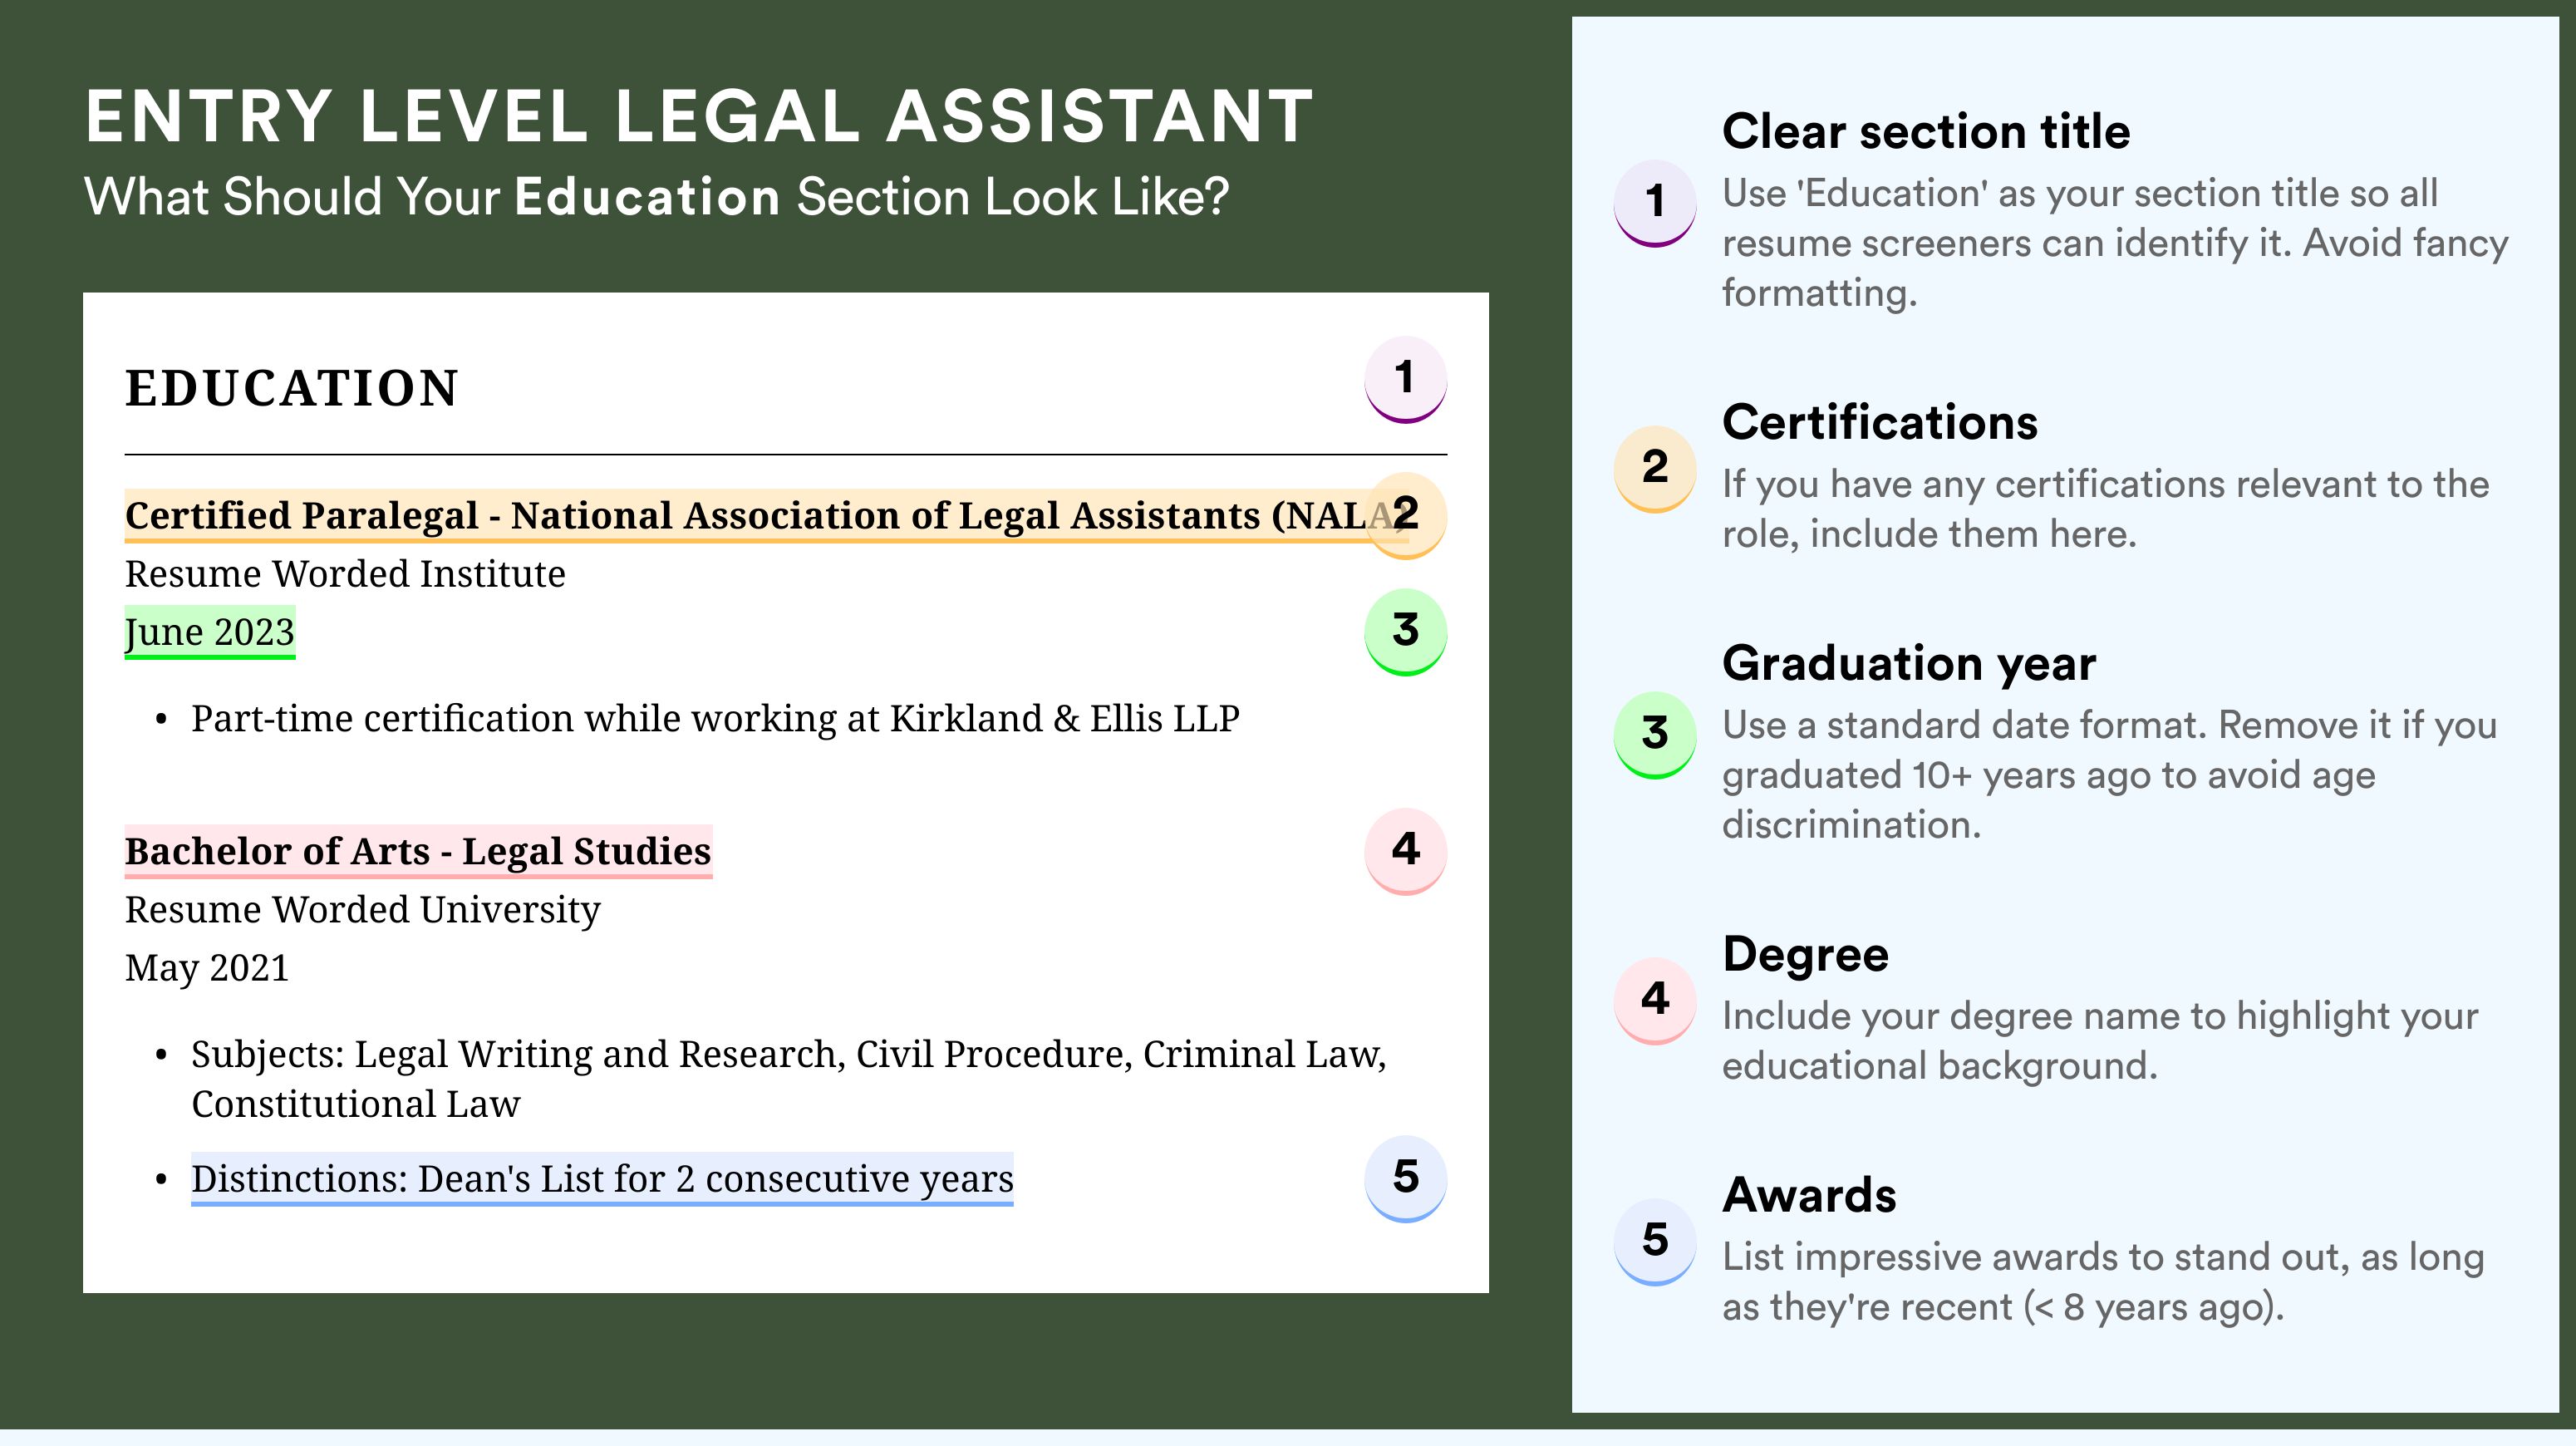 How To Write An Education Section - Entry Level Legal Assistant Roles